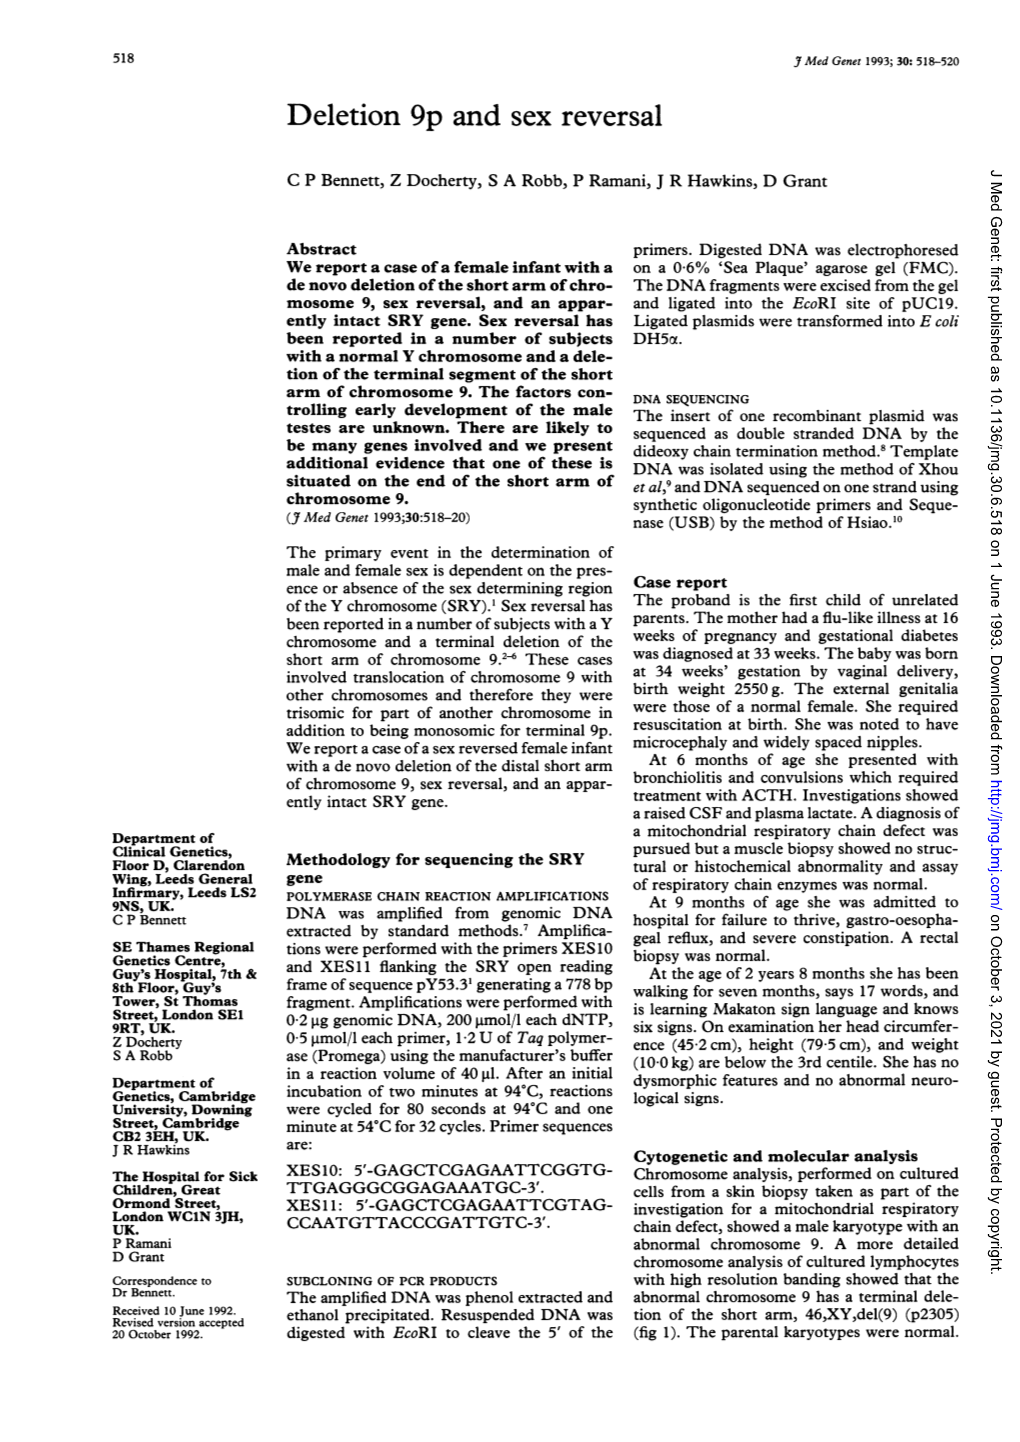 Deletion 9P and Sex Reversal J Med Genet: First Published As 10.1136/Jmg.30.6.518 on 1 June 1993